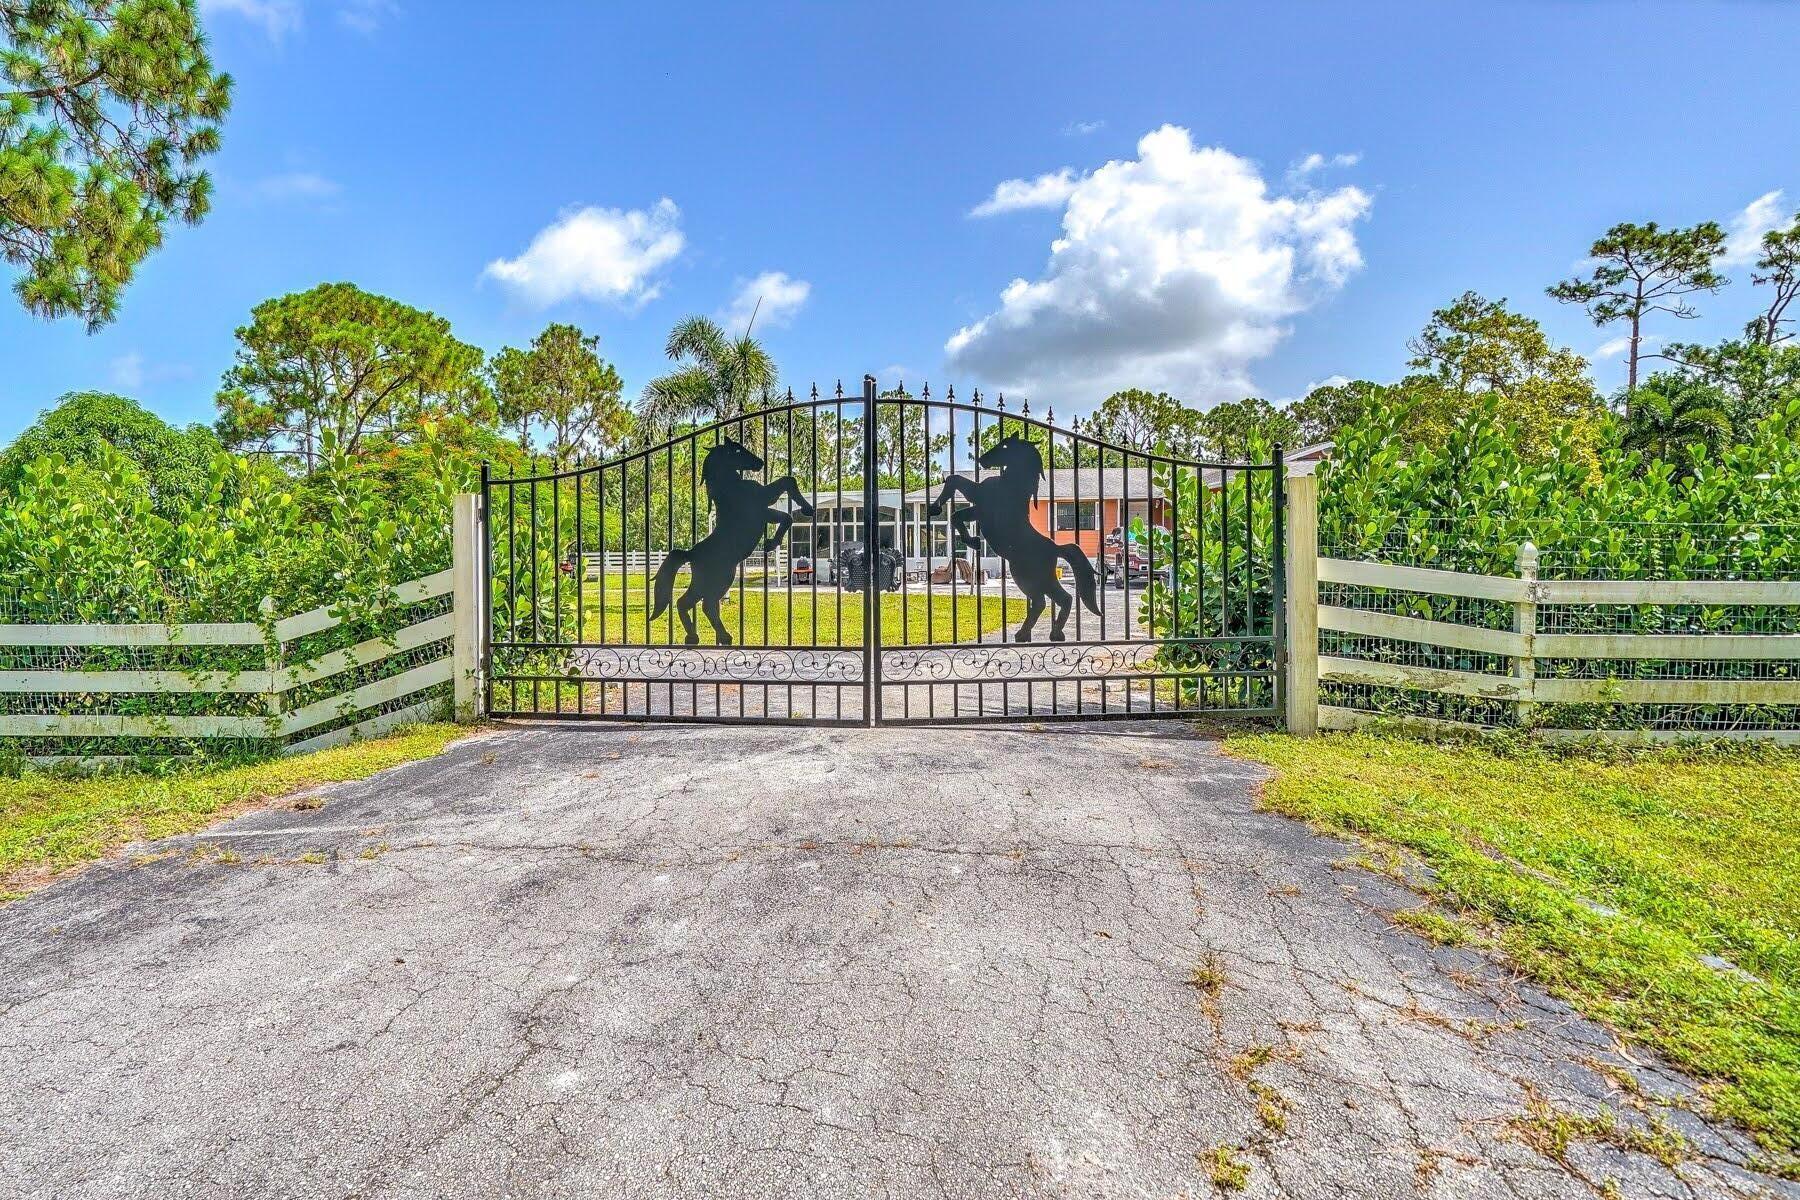 Discover Your Dream Equestrian Retreat: 4-Bed, 2-Bath Home on Over 1 Acre in Loxahatchee This stunning 4-bed, 2-bath single-family home is a true equestrian paradise in the heart of Loxahatchee. Nestled on over 1 acre of picturesque land, this property offers a unique blend of modern luxury and timeless equestrian charm. Step inside to find a meticulously maintained and fully renovated residence. Every room showcases impeccable craftsmanship and high-end finishes, providing an inviting and comfortable atmosphere for you and your family. The heart of this home is the spacious social area, ideal for seamless entertaining and family gatherings. The gourmet kitchen boasts top-of-the-line appliances, ample counter space, and an expansive island, making it a chef's delight.